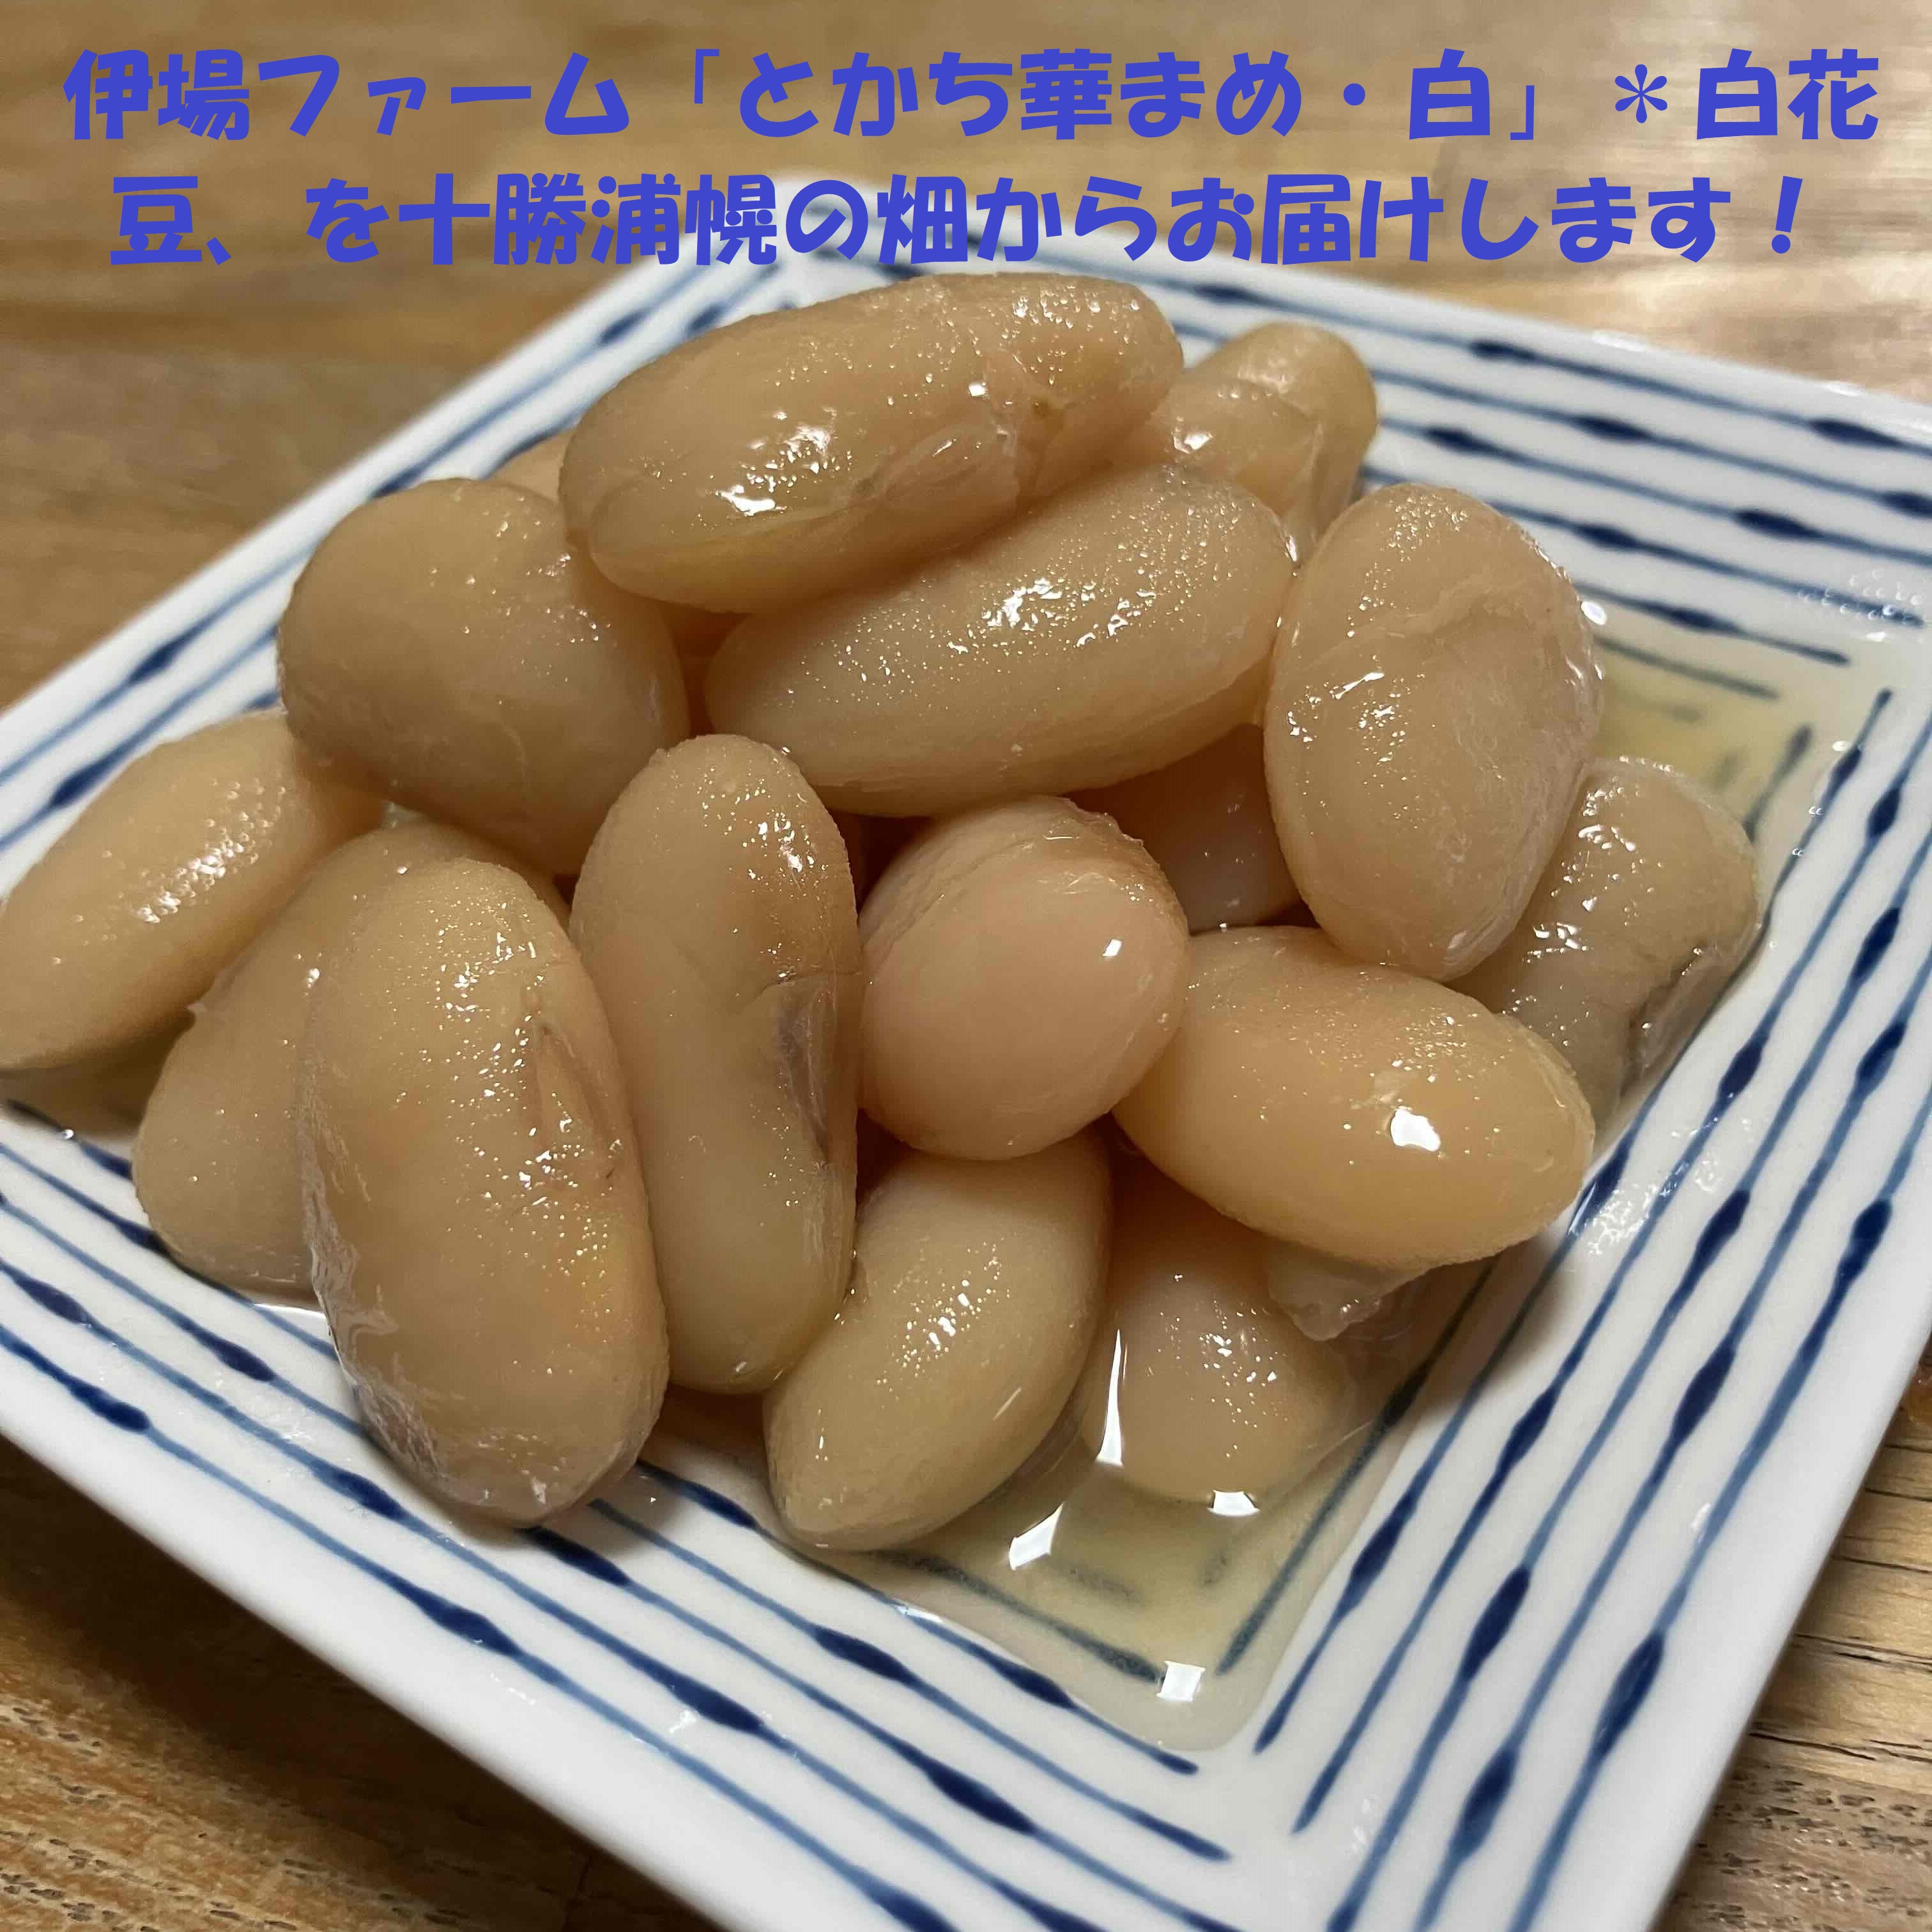  acceptance beginning![ new thing ] white flower legume 800g[ and ....* white ]. peace 5 year production free shipping agriculture . water production large .. winning Hokkaido Tokachi New Year cellulose abundance 